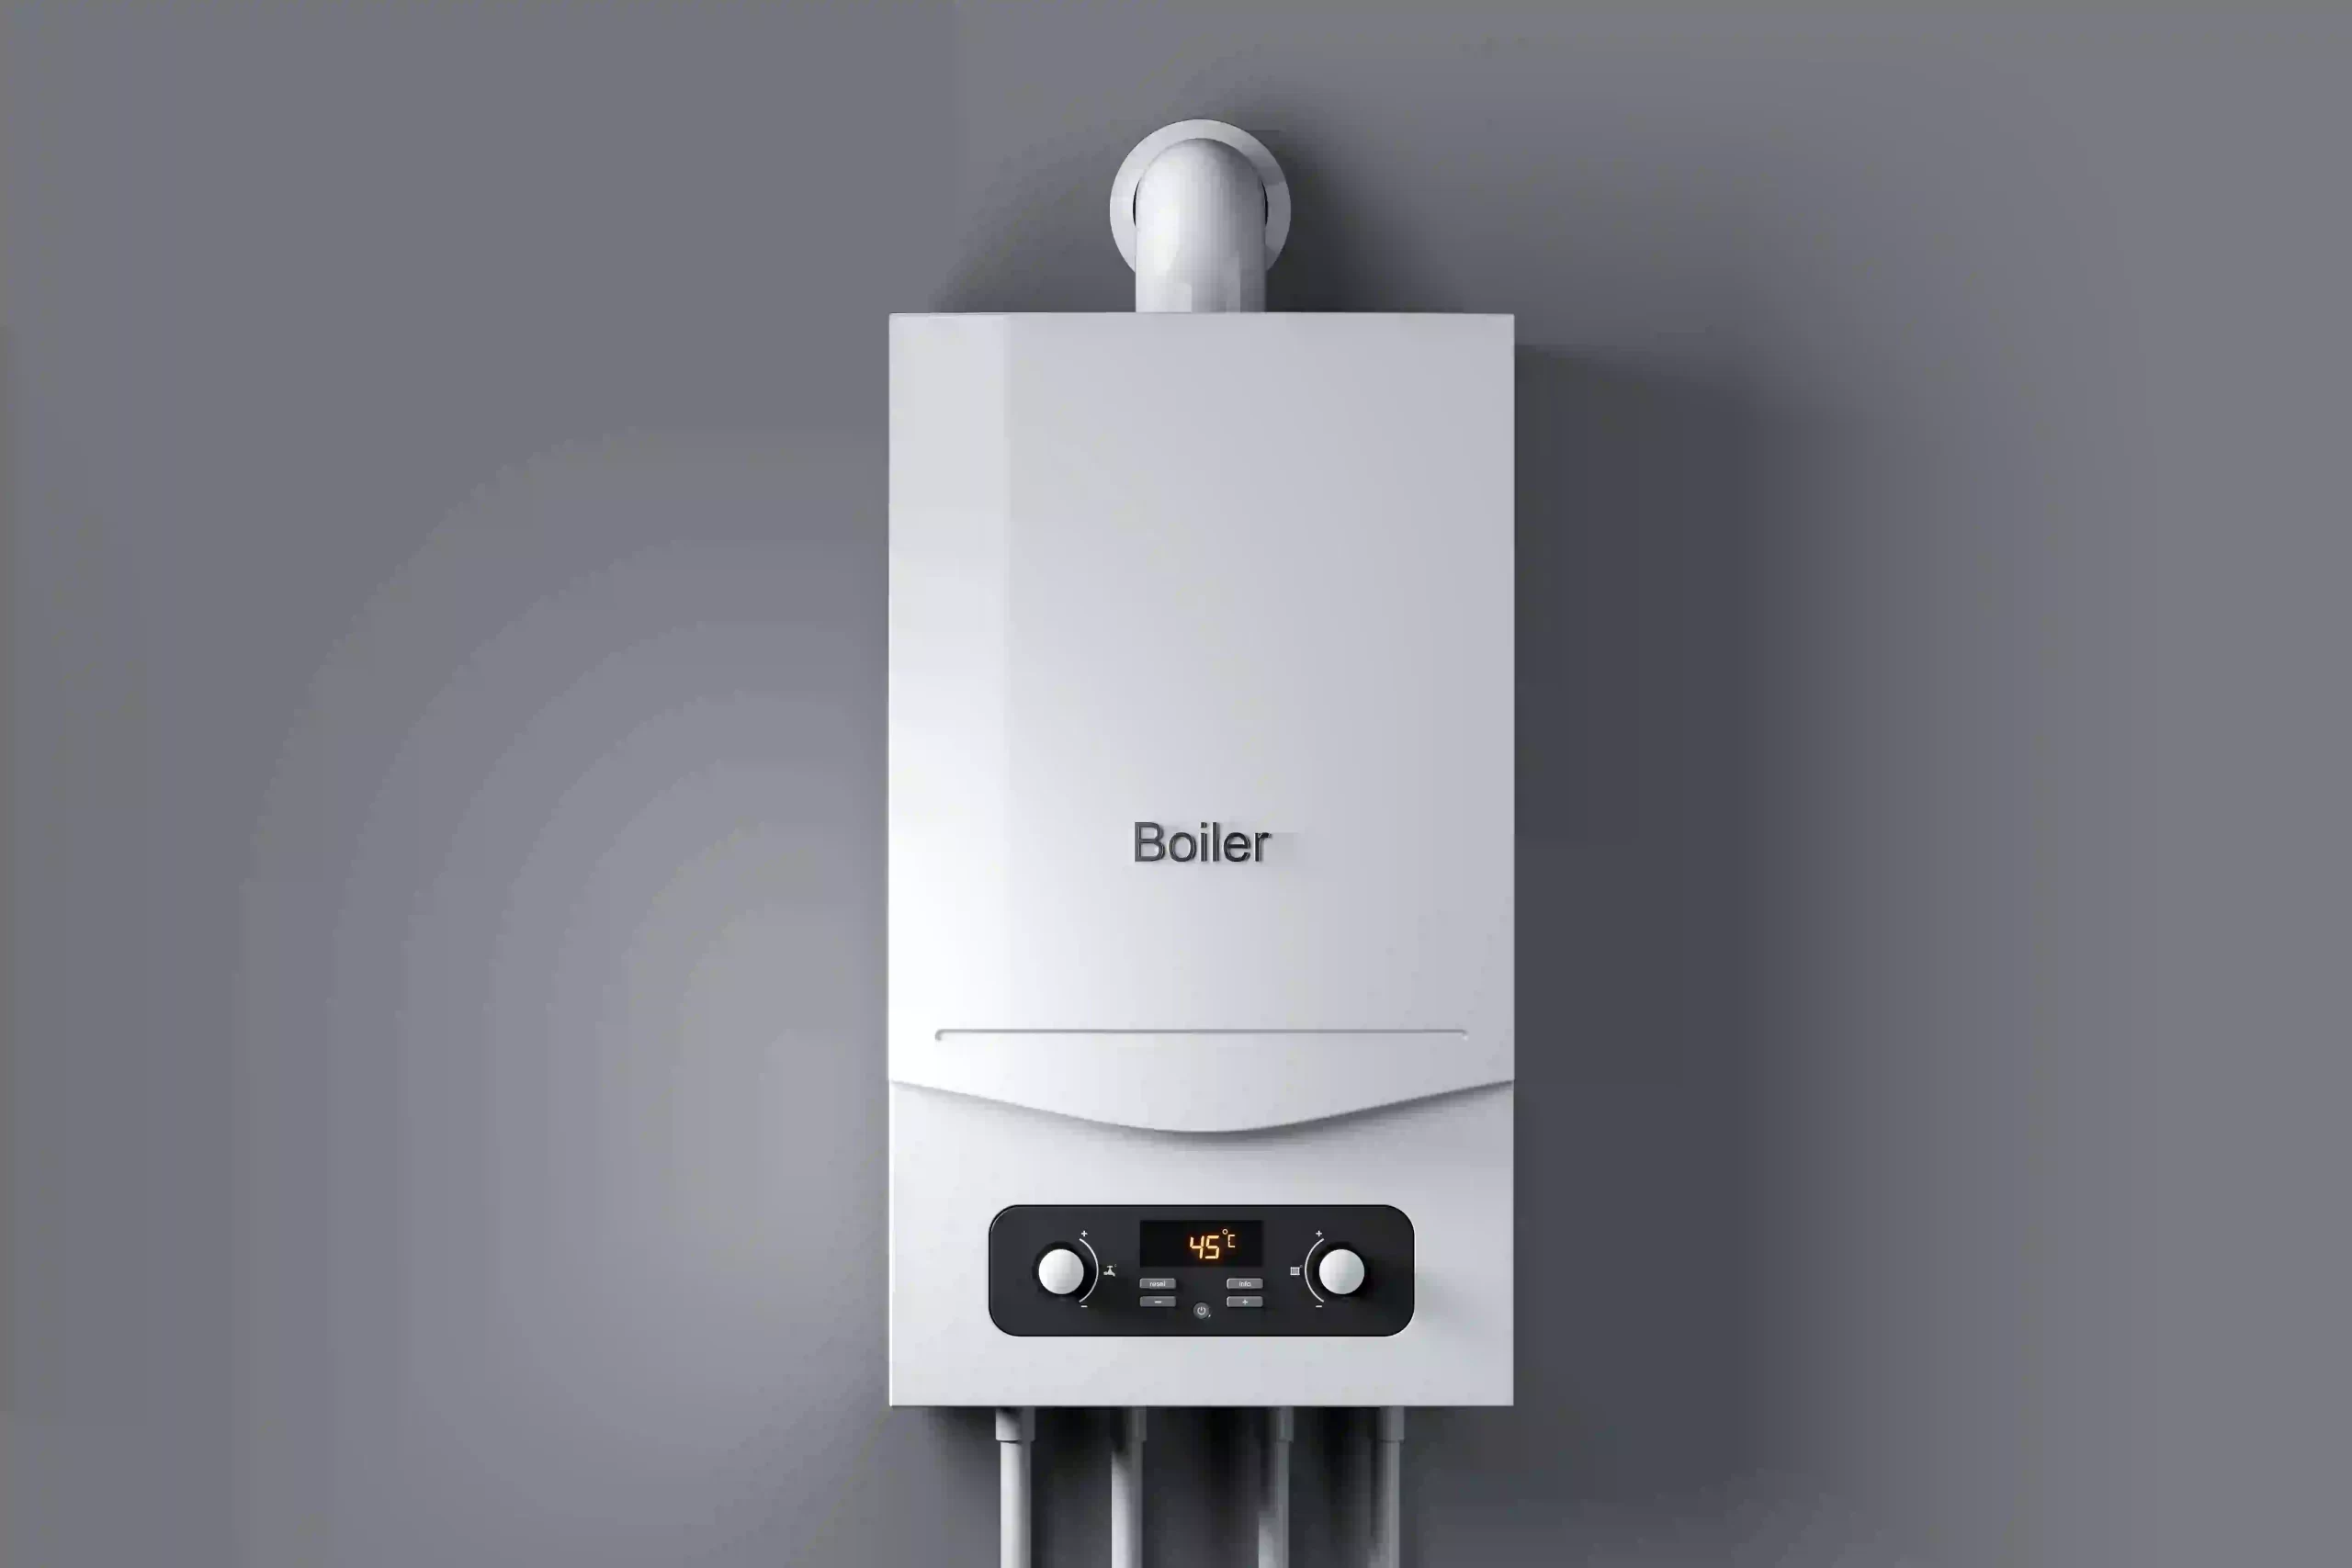 Modern combi boiler on a grey wall with digital temperature display